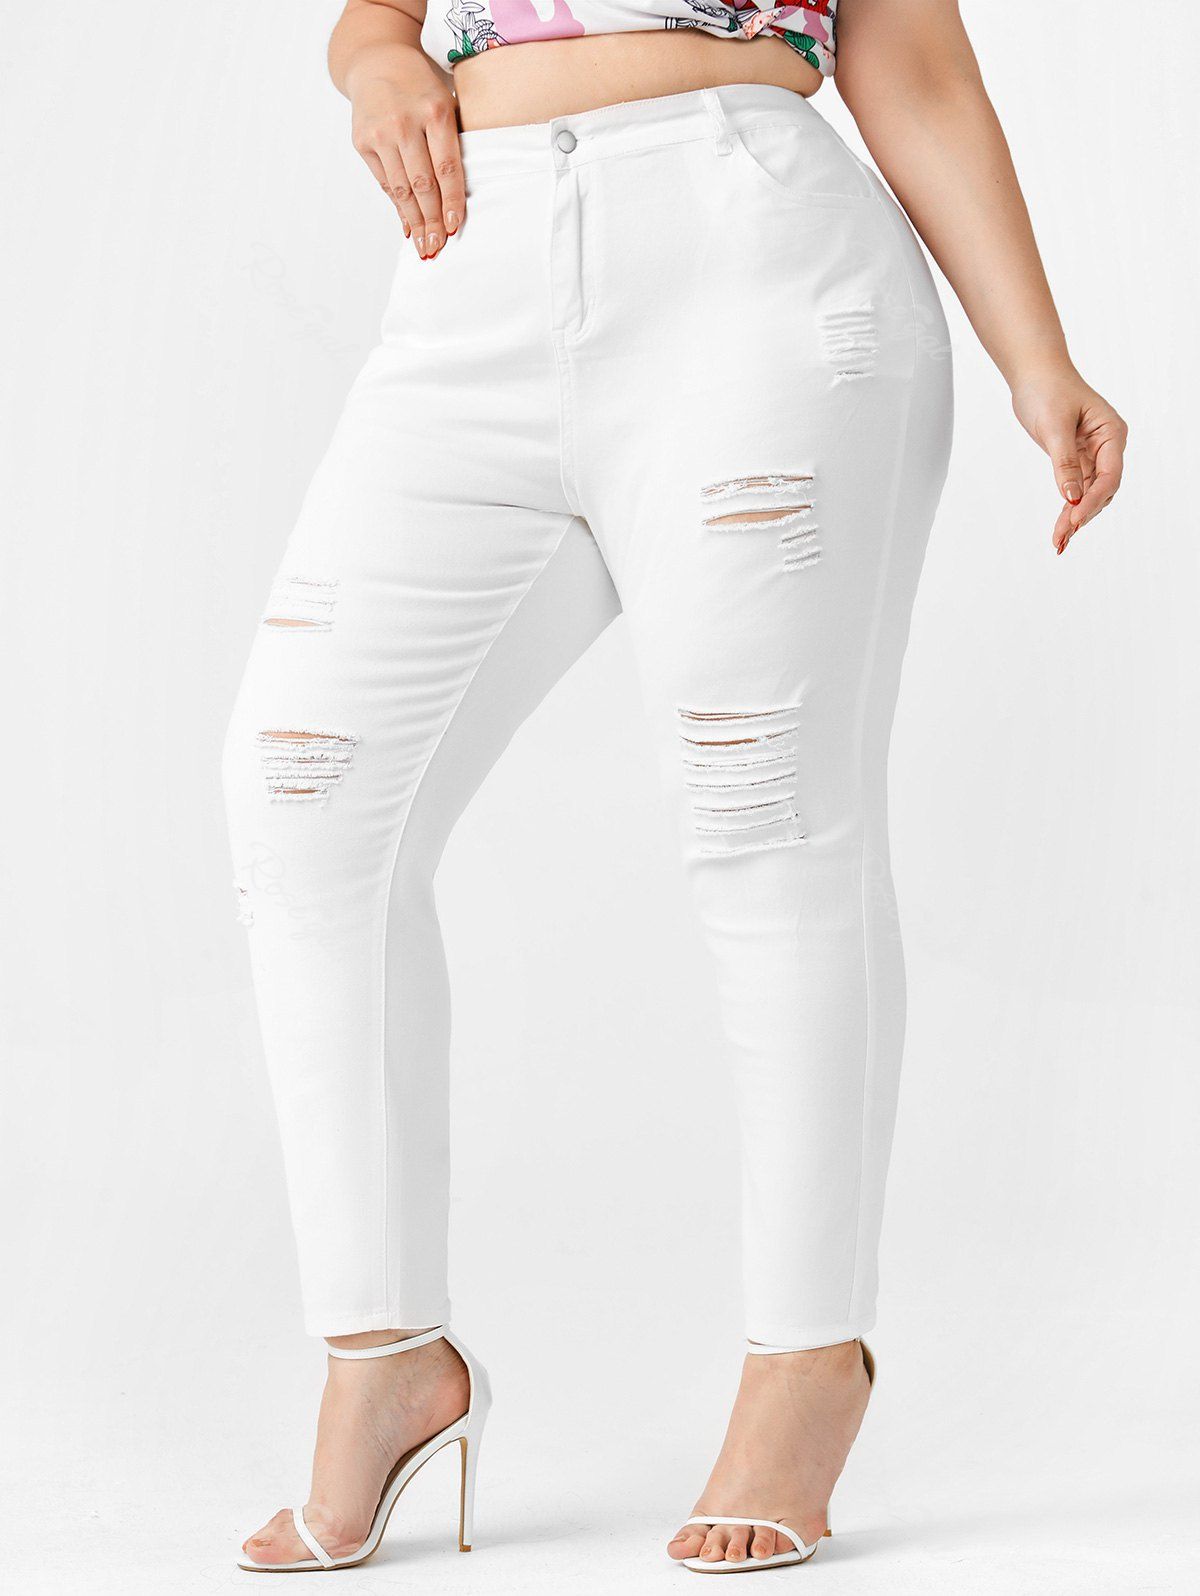 Buy Plus Size High Waist Distressed Ripped Jeans  